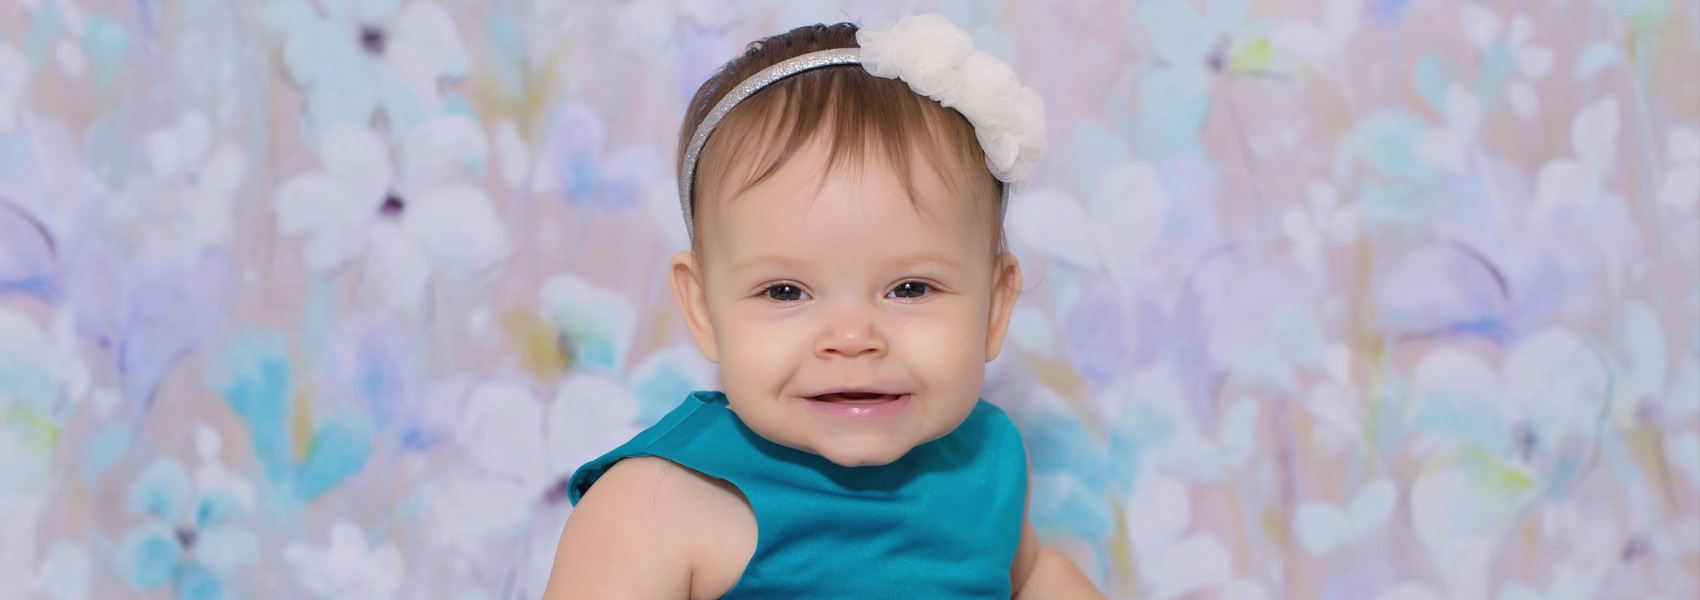 Corinne, 9 Month Session